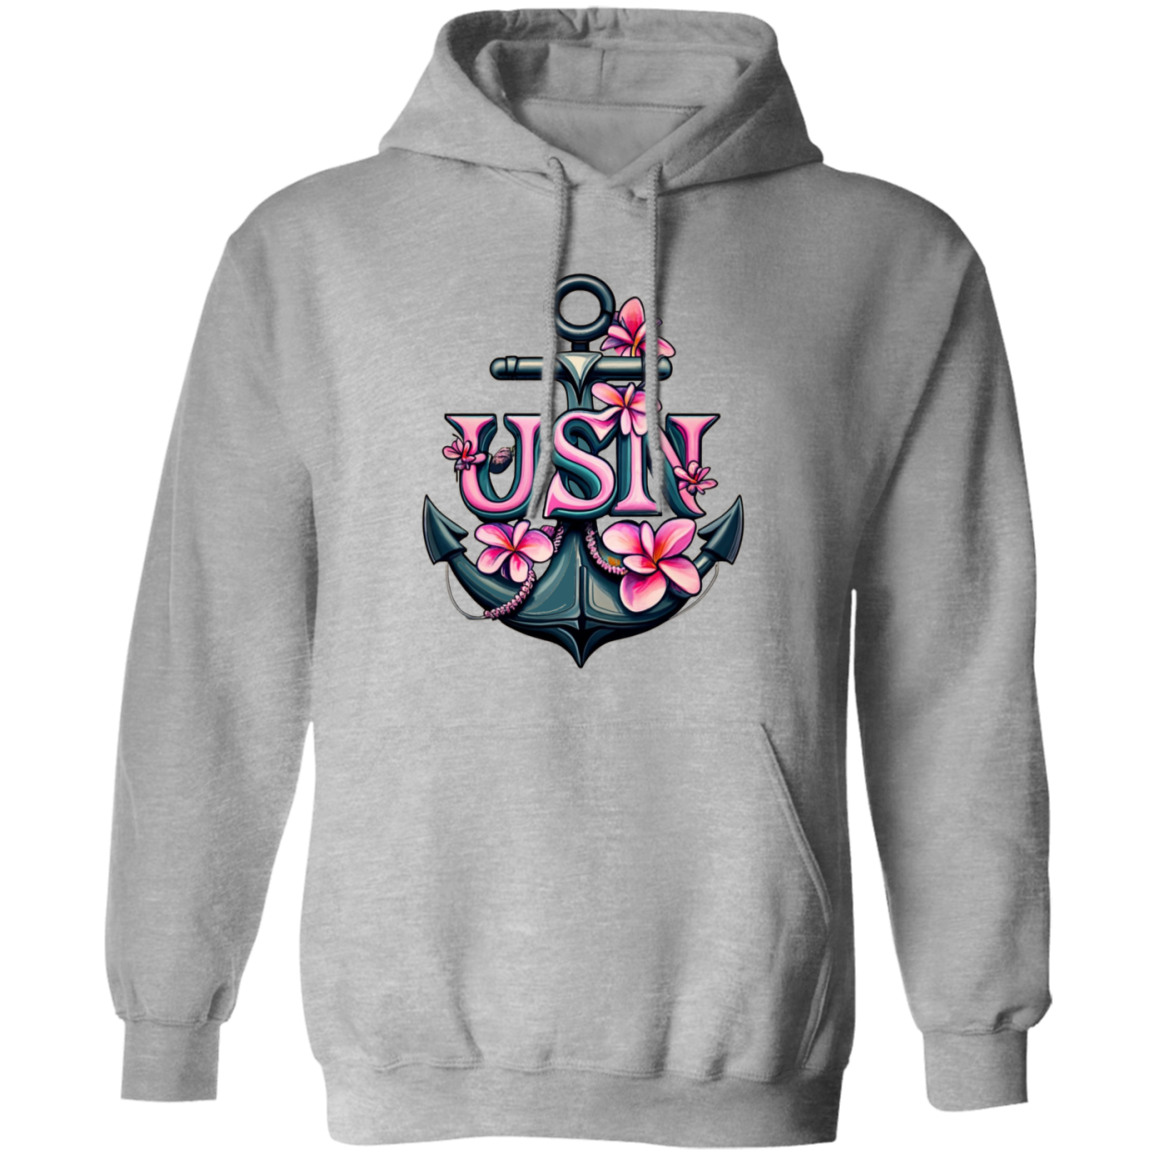 Pink Flower Anchor Pullover Hoodie